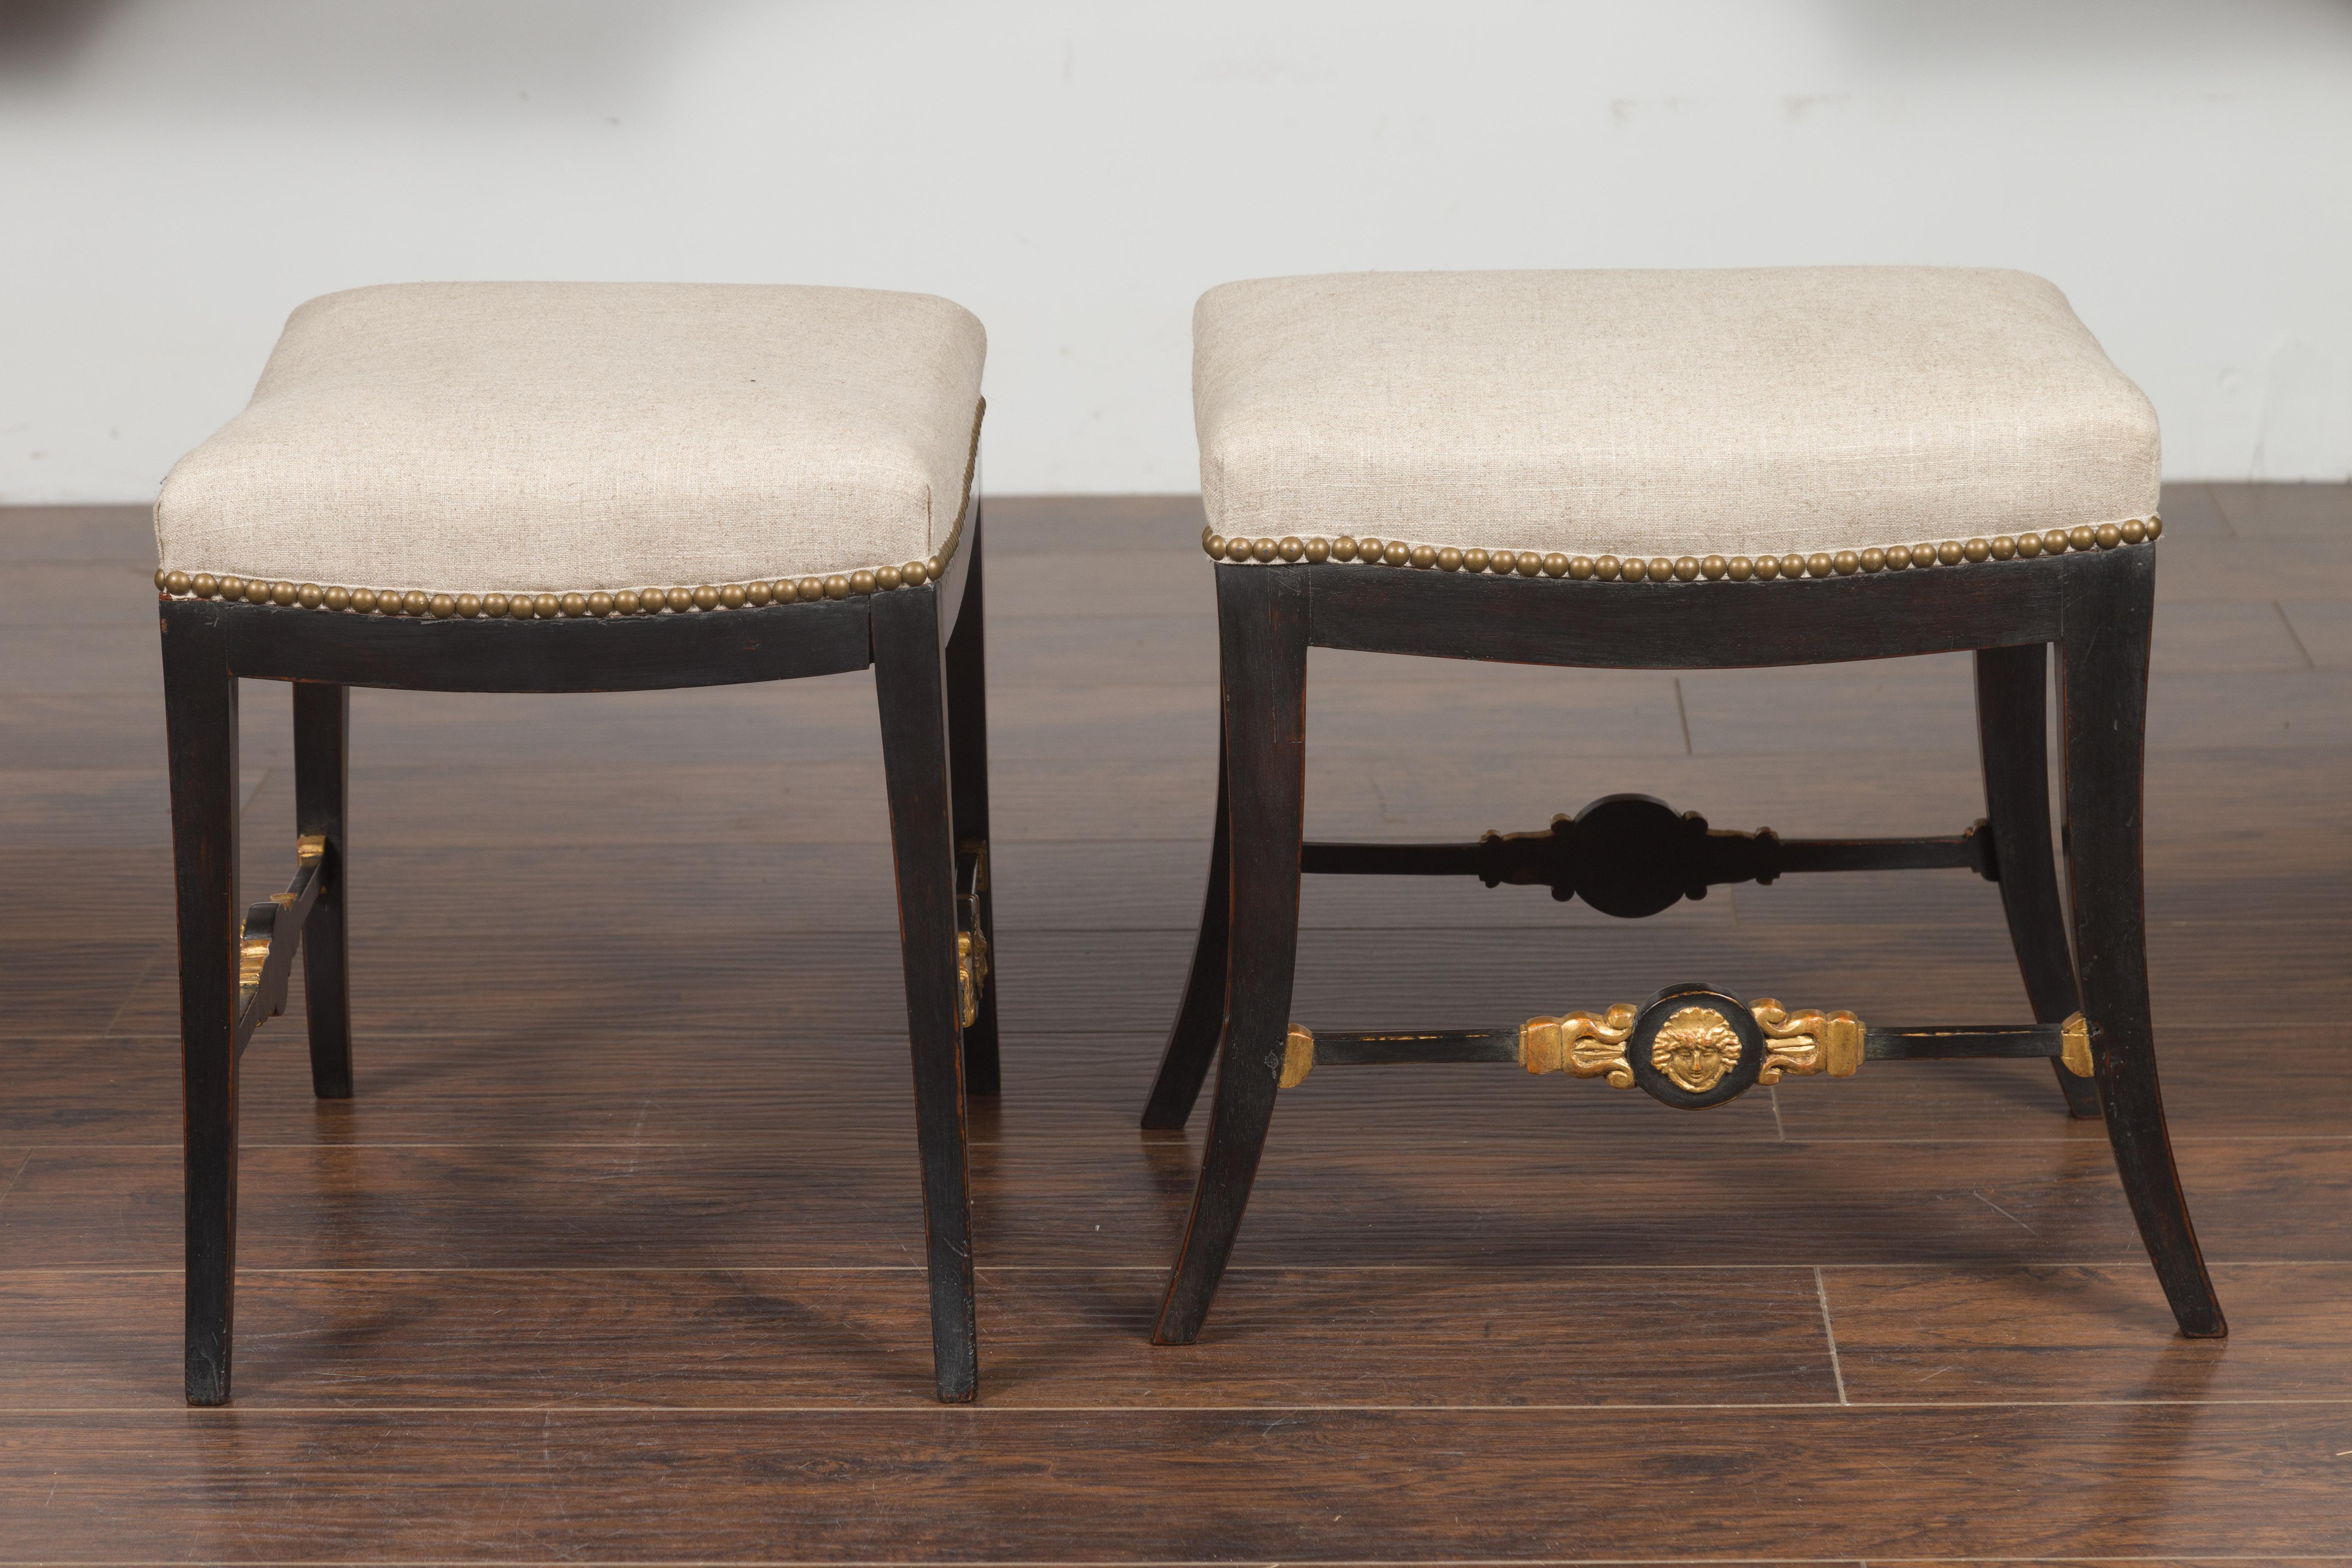 Pair of English Regency 1820s Ebonized and Gilt Stools with New Upholstery For Sale 5